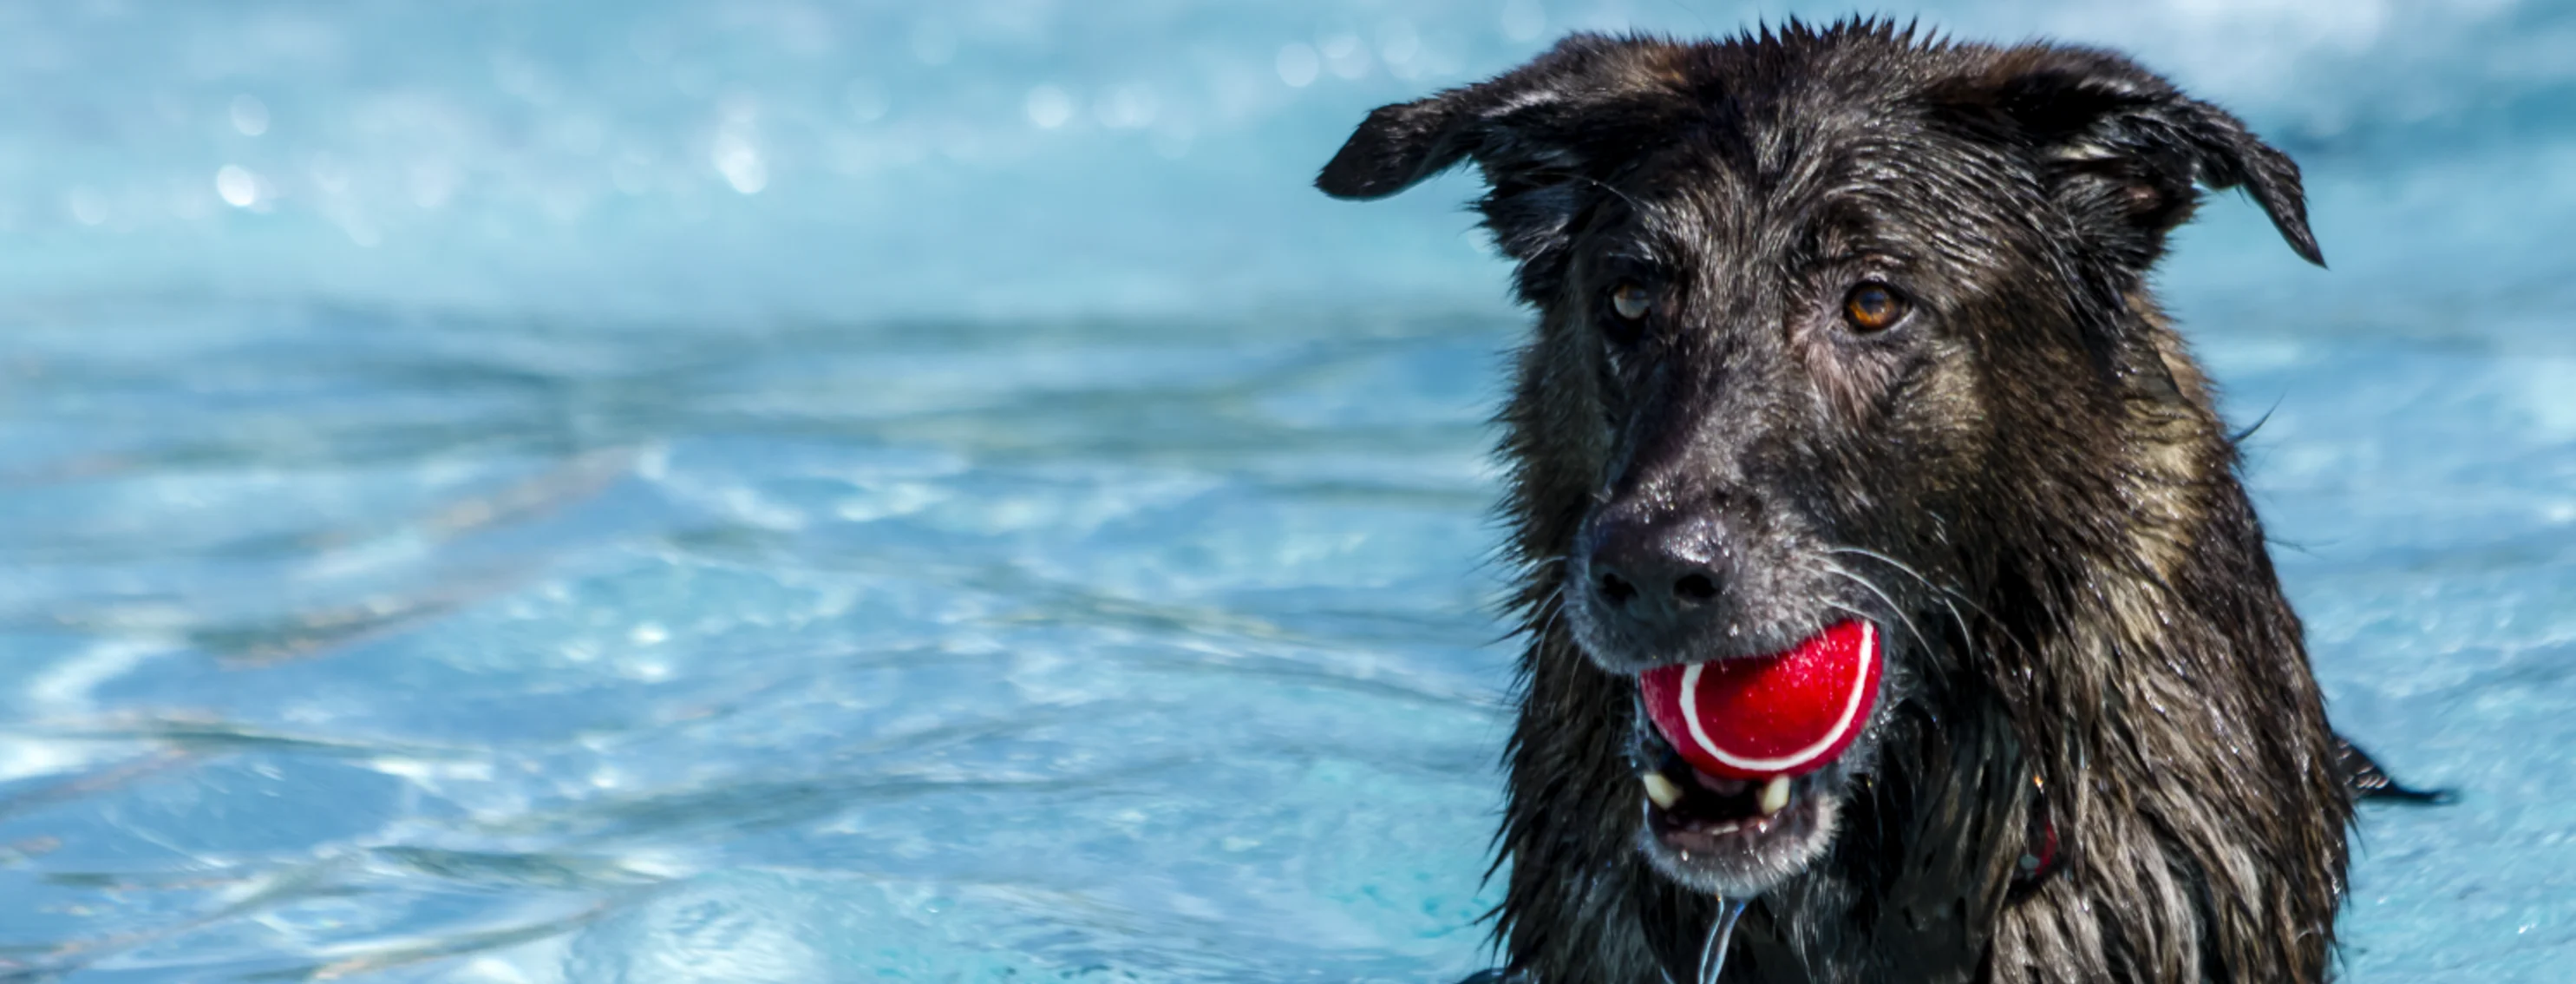 Dog with a red ball in a pool